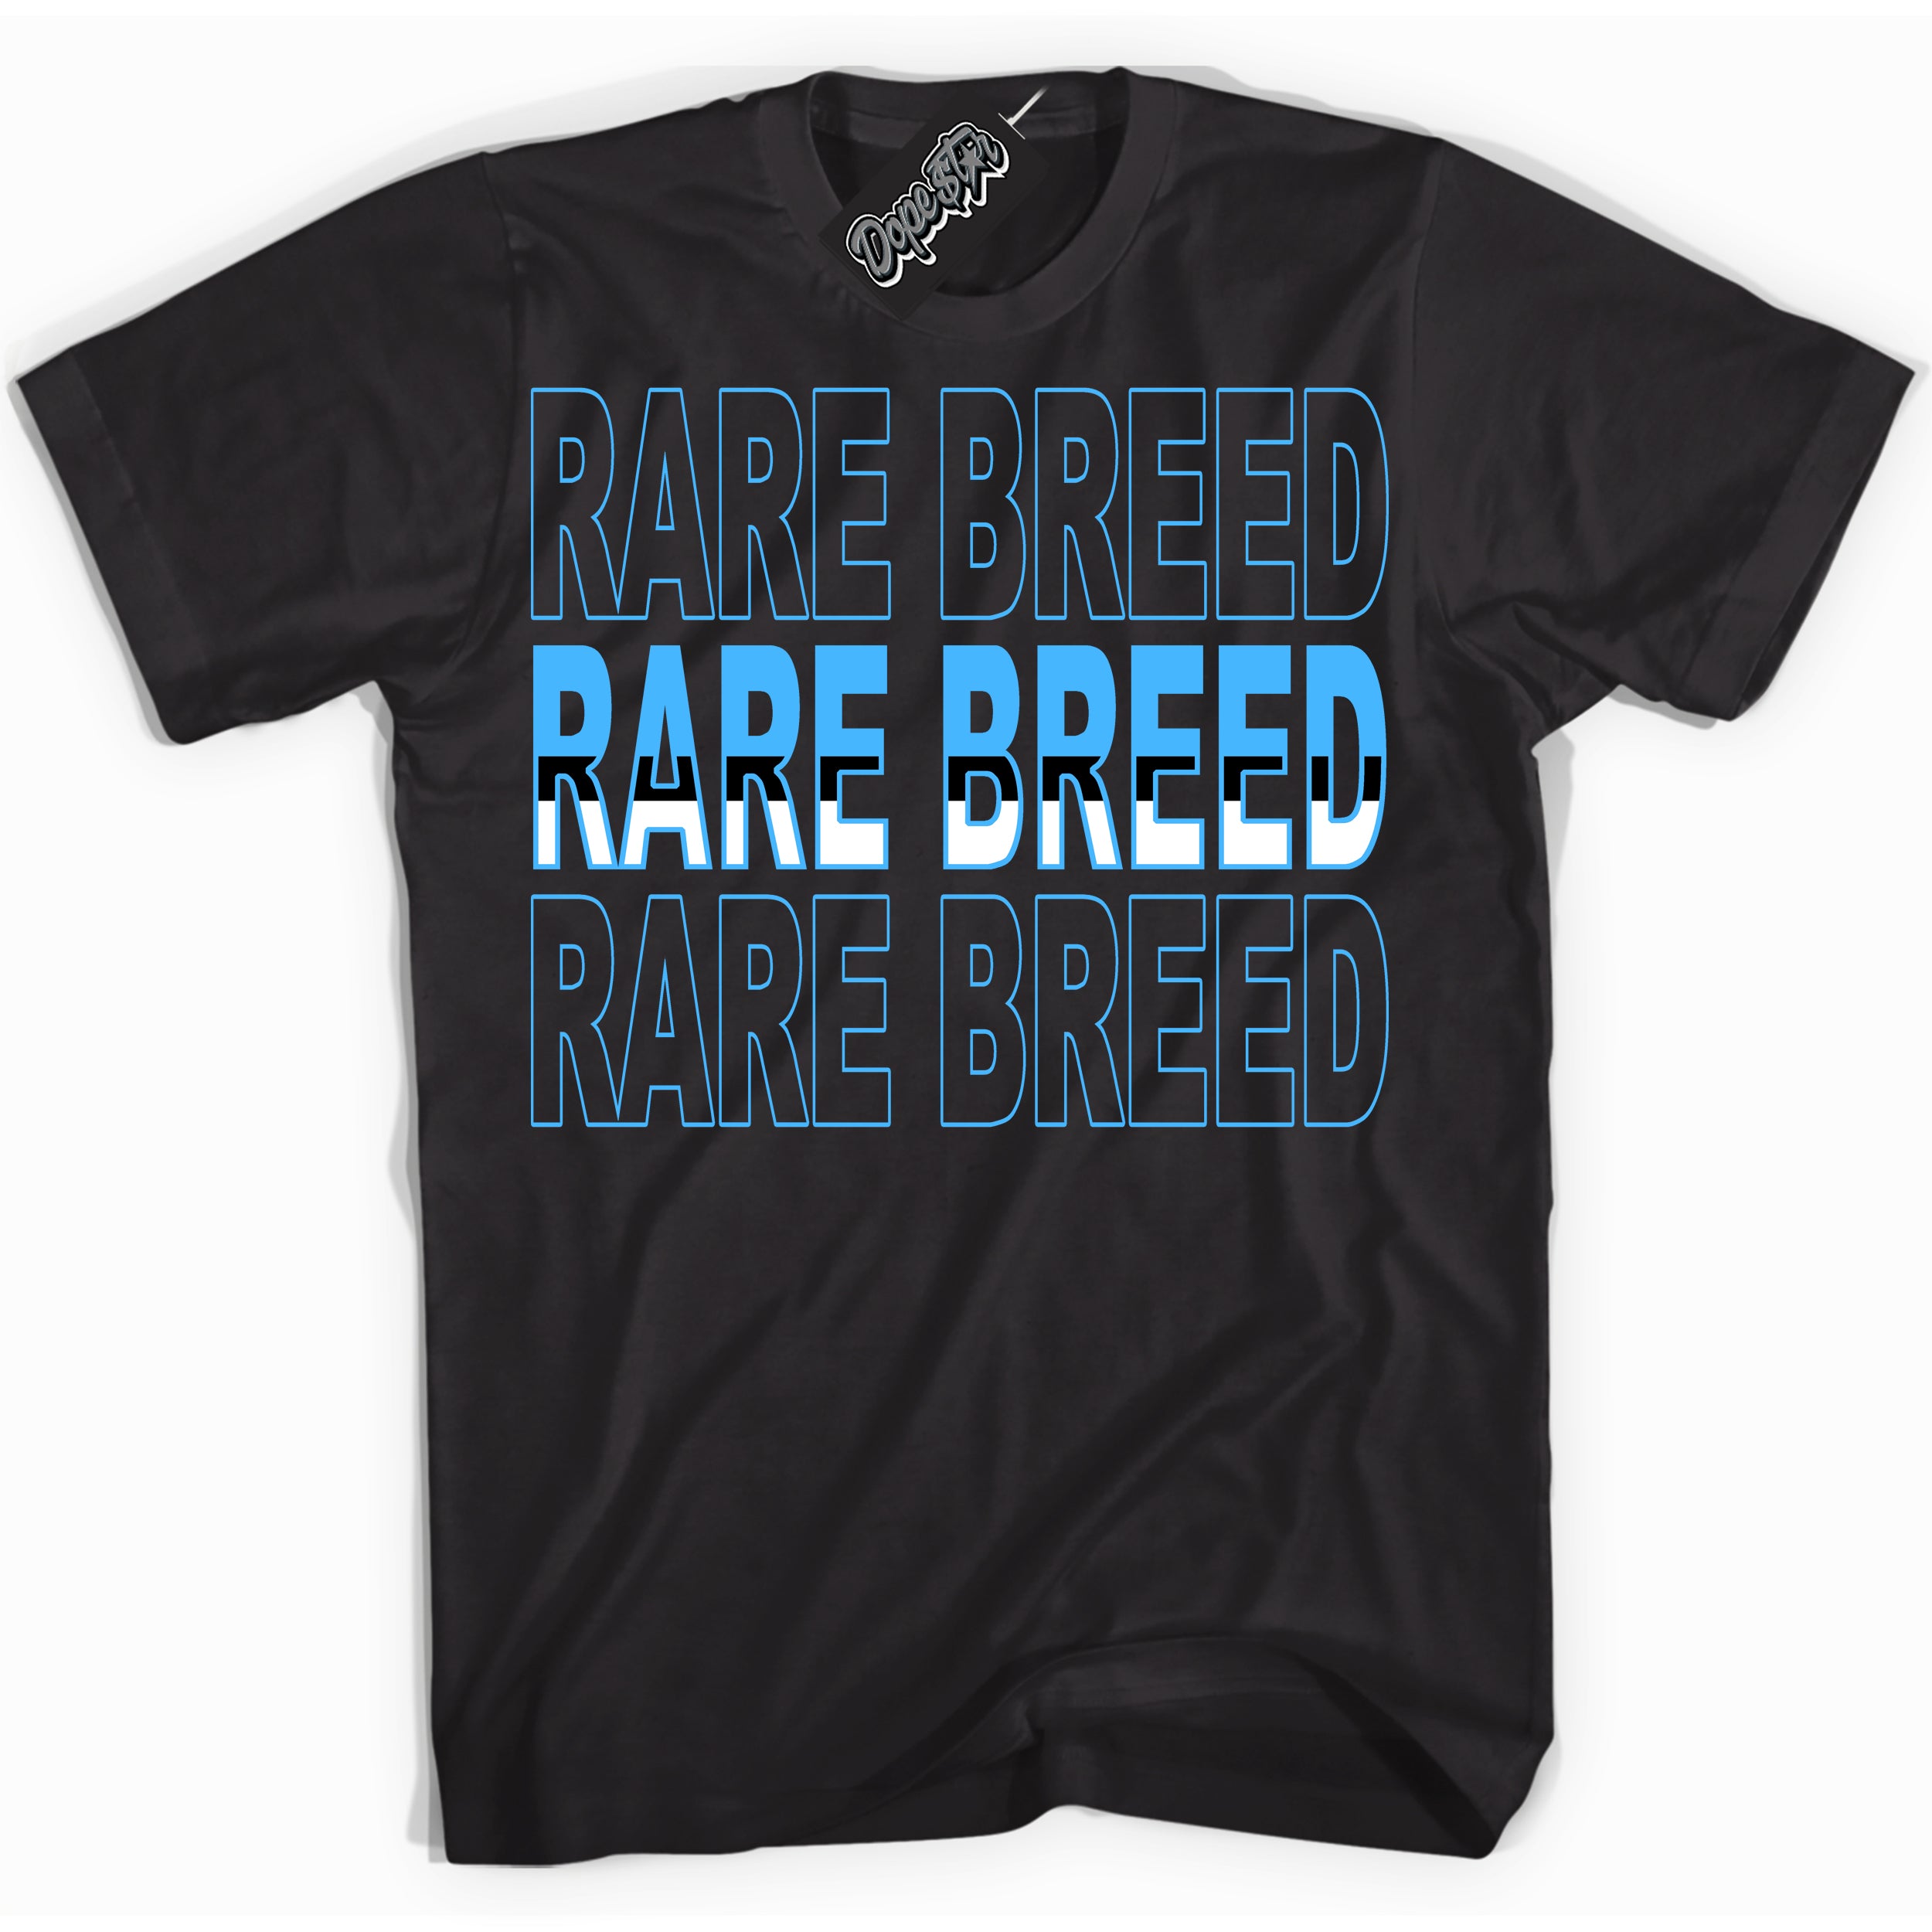 Cool Black graphic tee with “ Rare Breed ” design, that perfectly matches Powder Blue 9s sneakers 